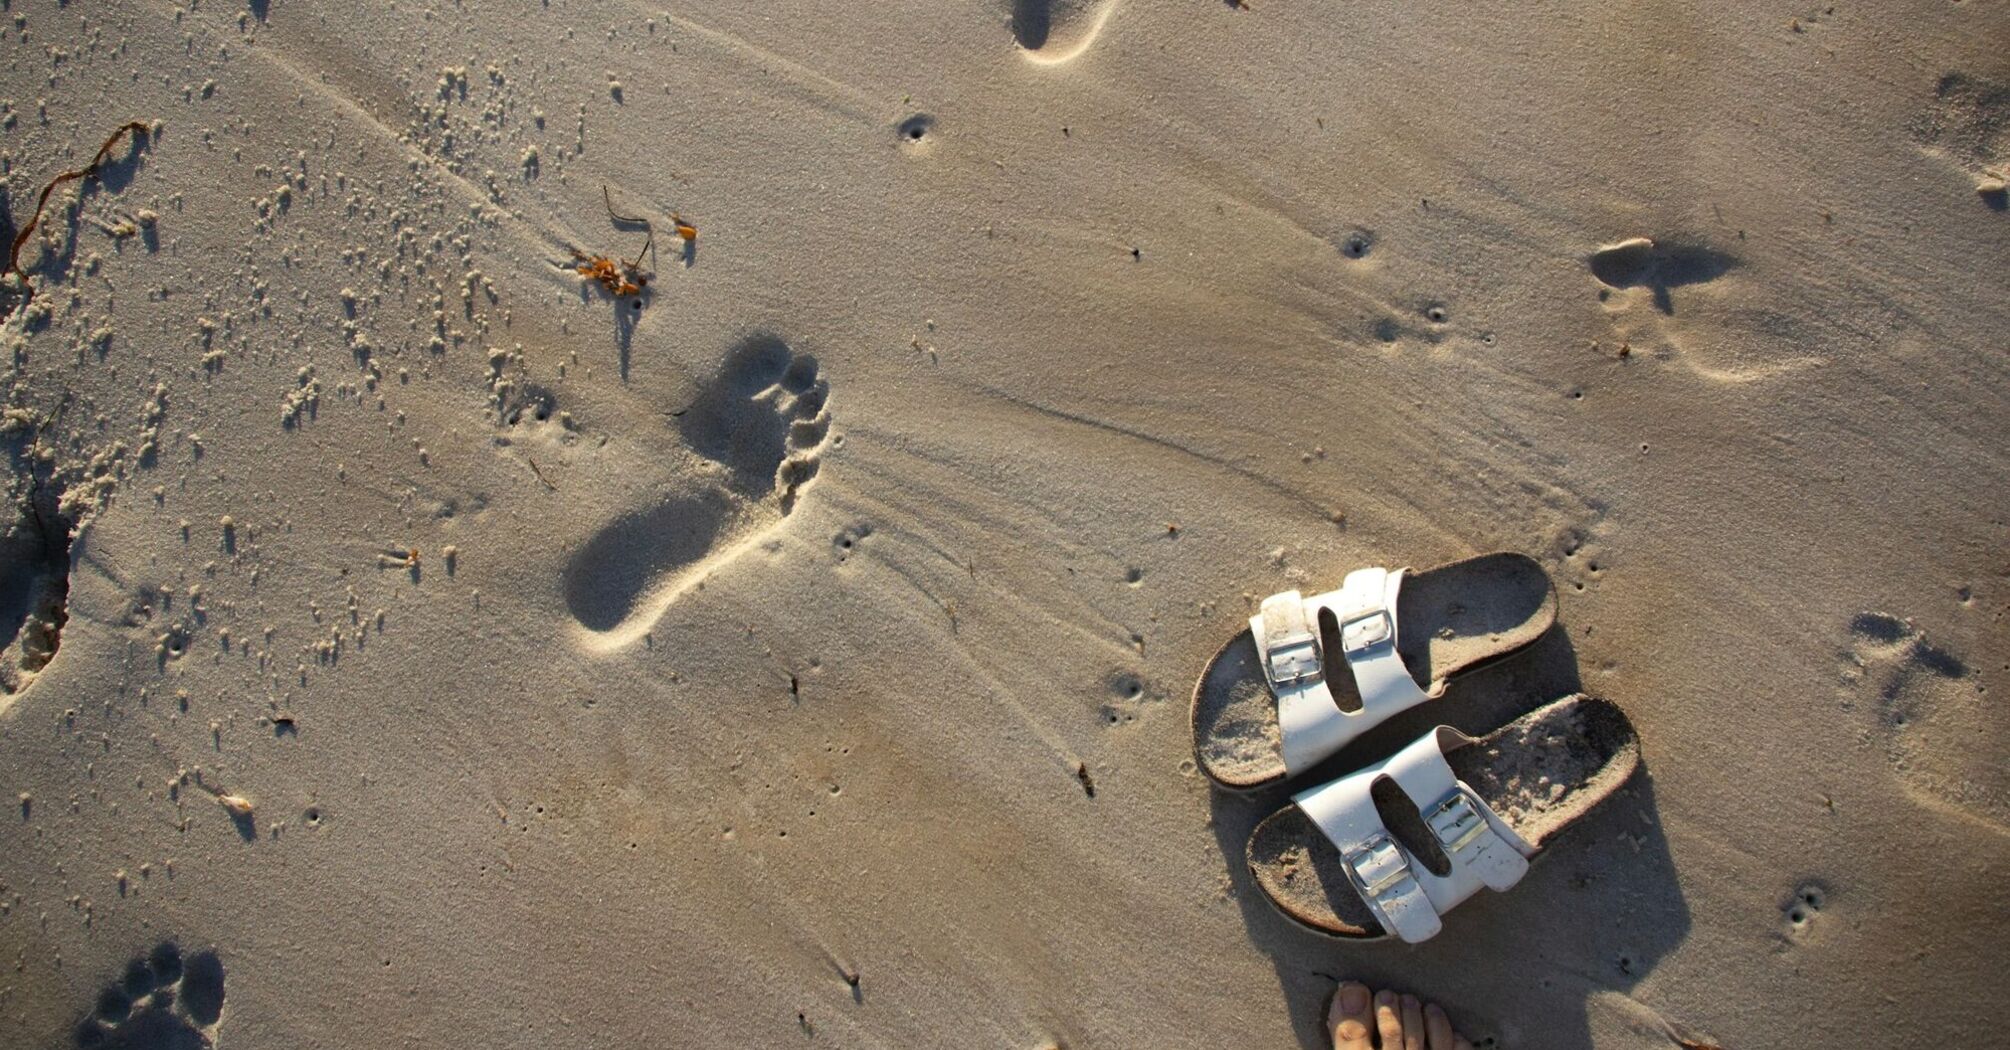 Footprints and a pair of sandals on sandy beach